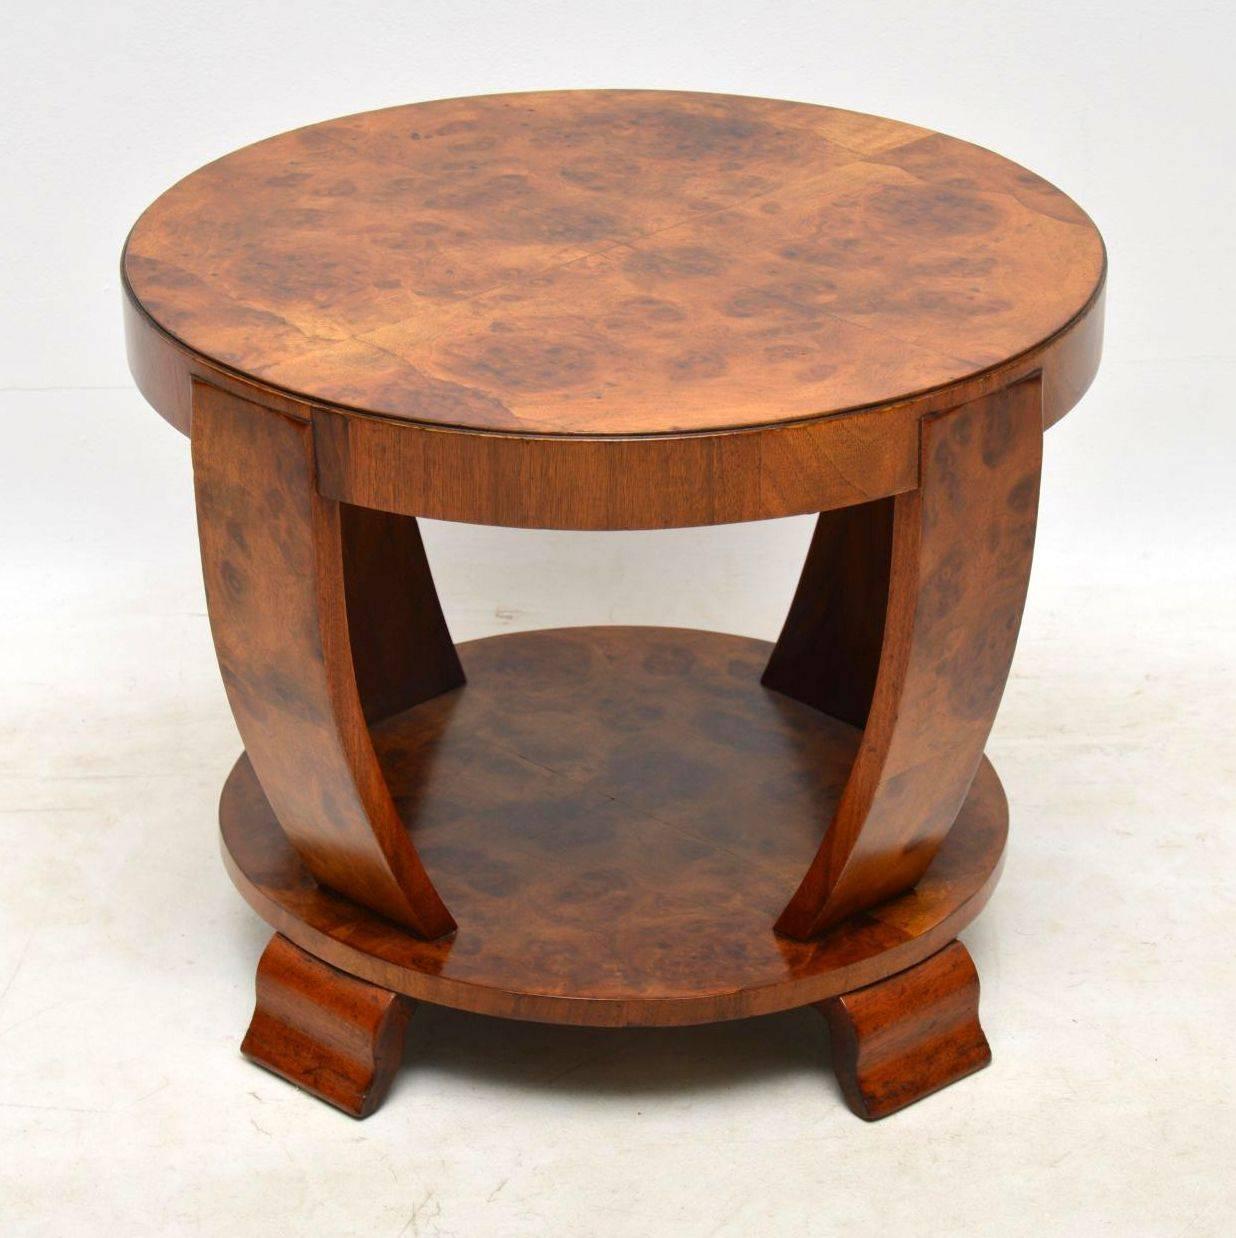 A stunning original Art Deco coffee table, this is beautifully made in burr walnut, it dates from the 1920-30’s. We have had this fully stripped and re-polished to a very high standard, the condition is superb for it’s age. There are a few small